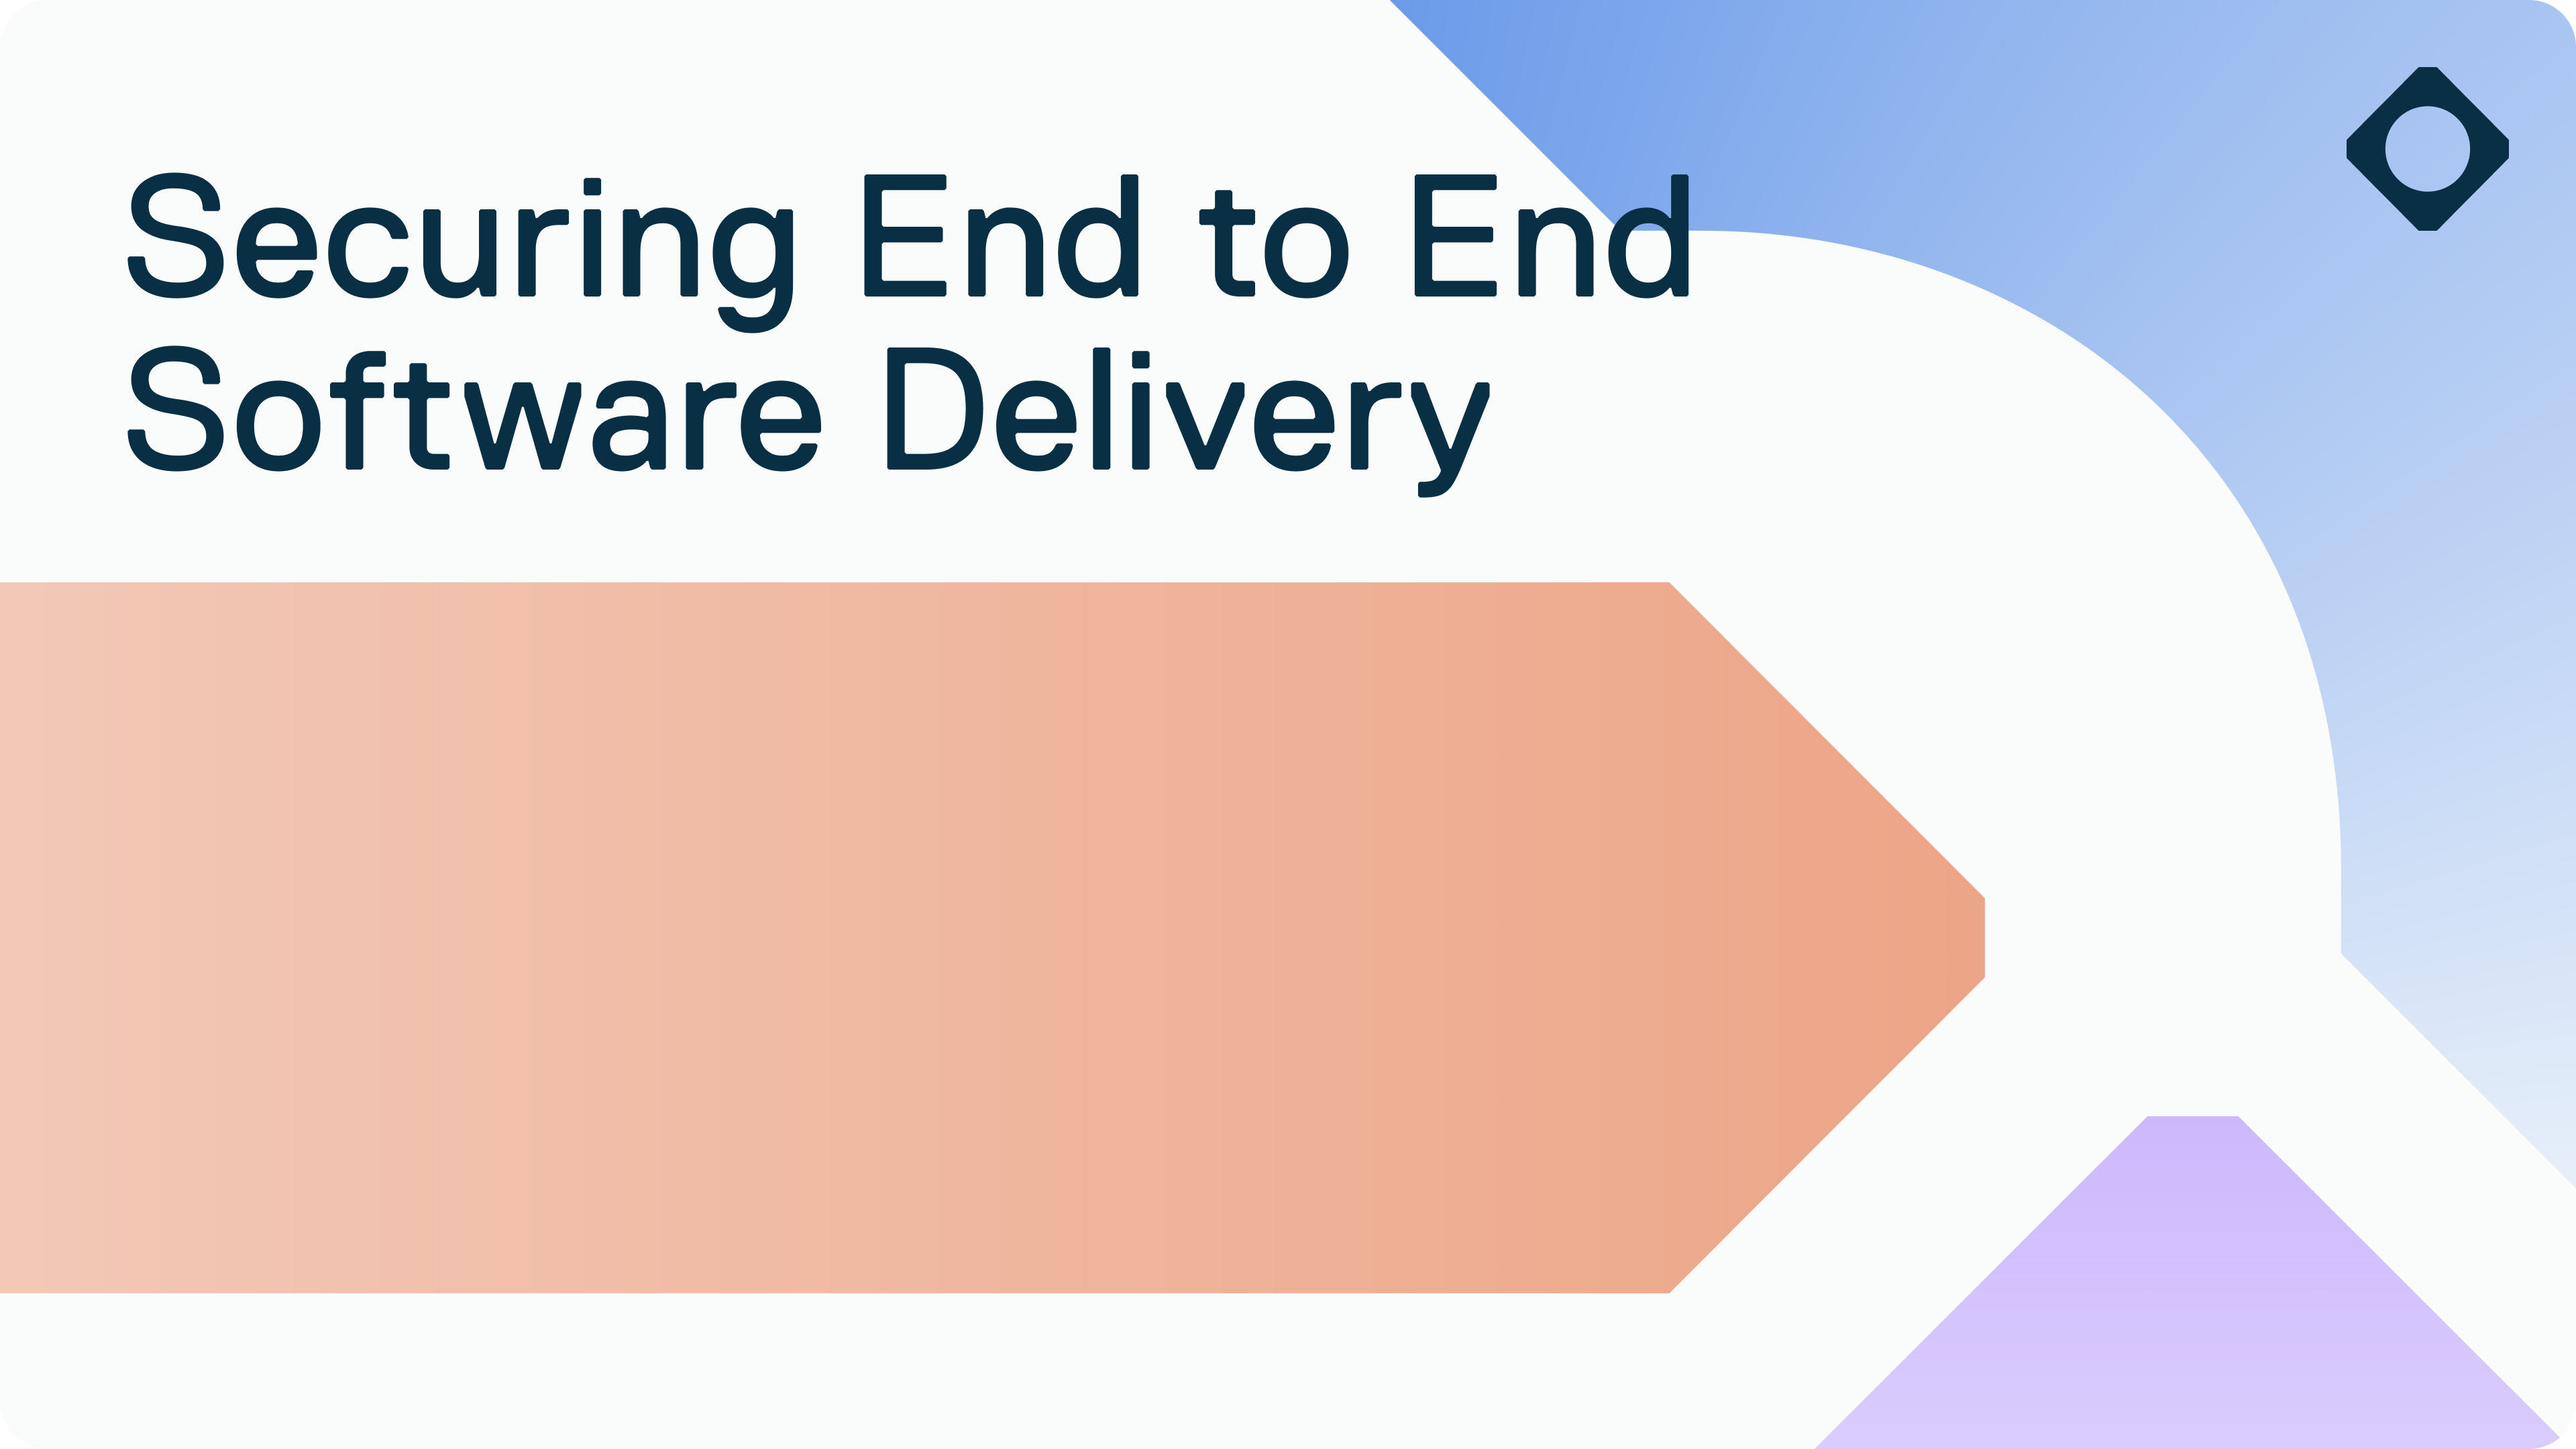 Securing End to End Software Delivery